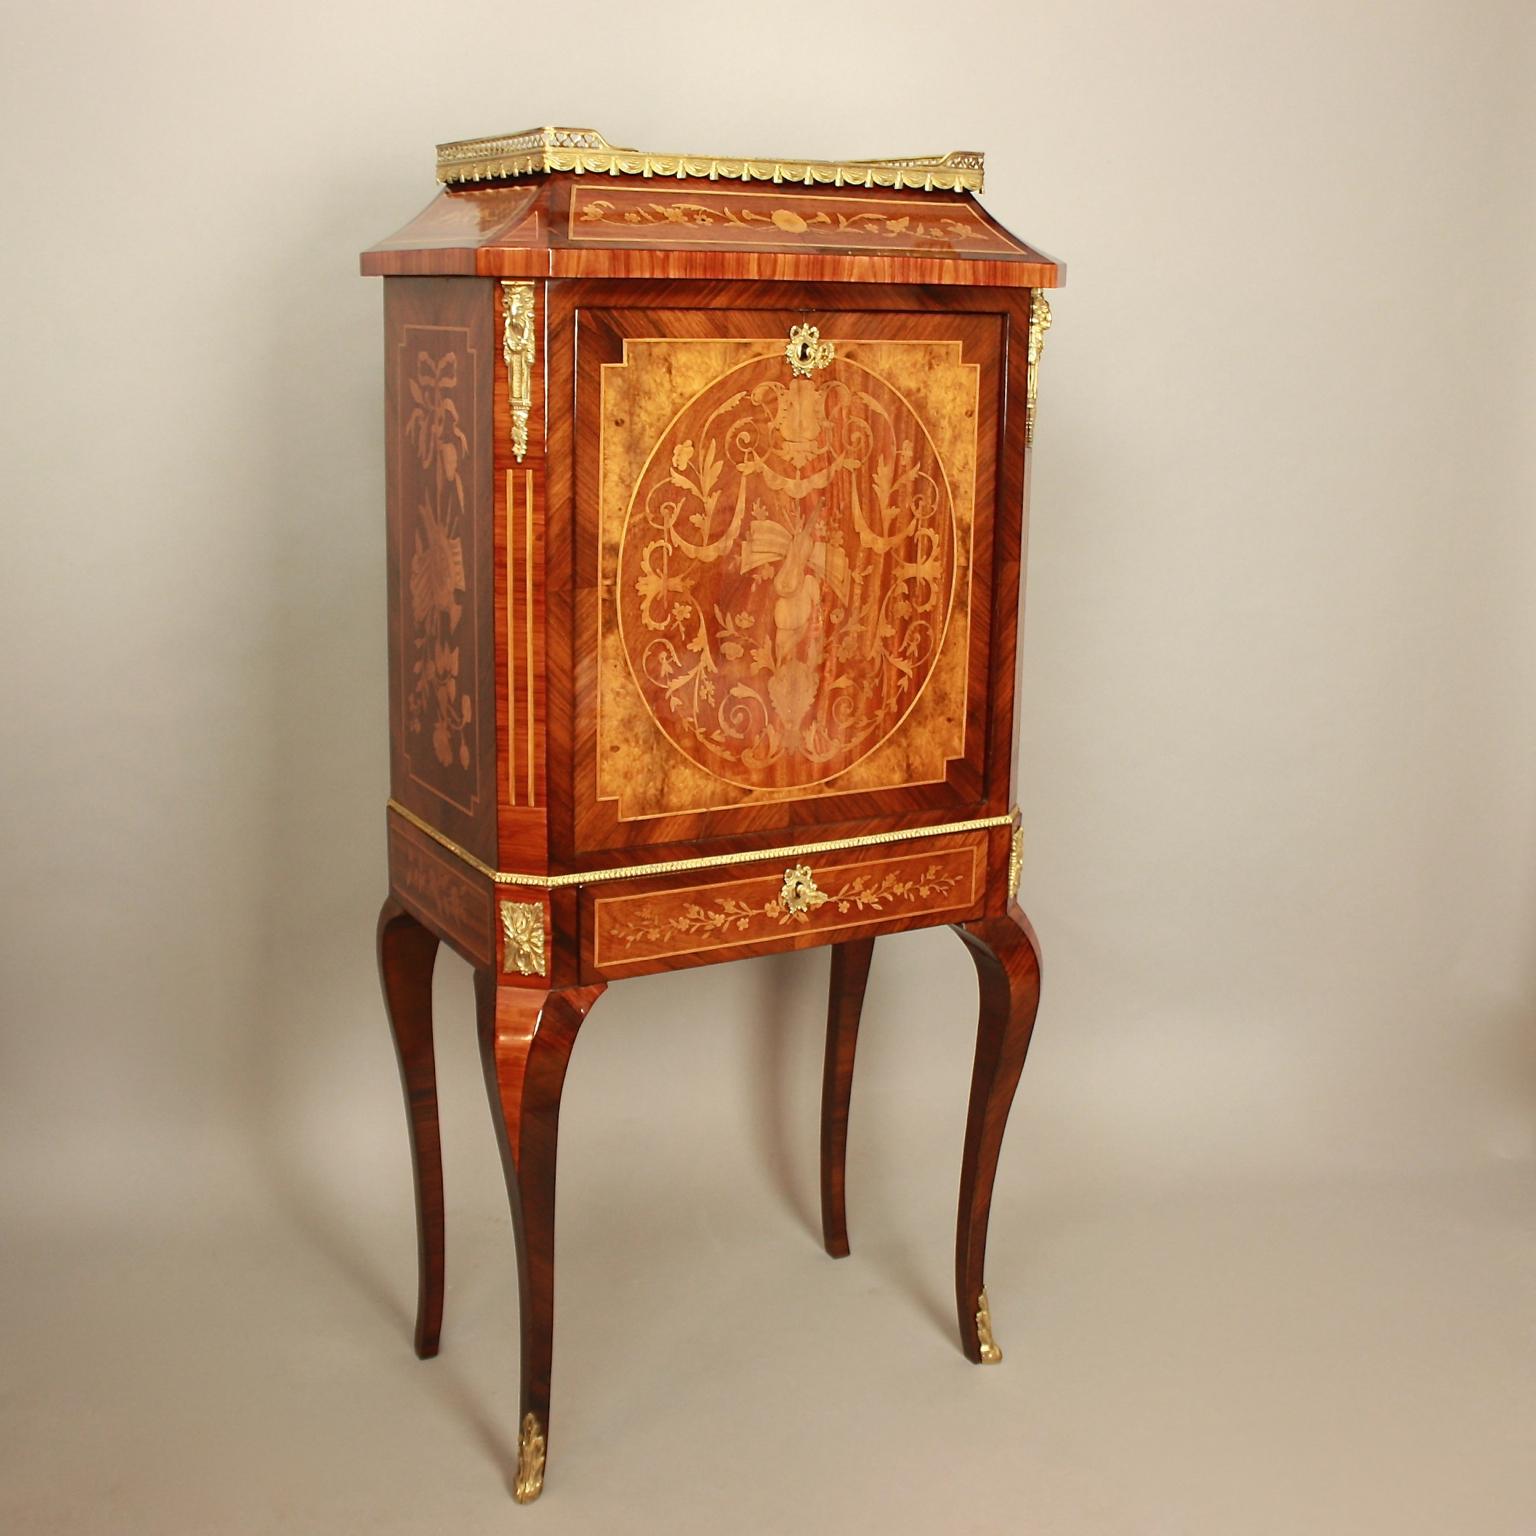 19th Century Louis XVI Floral Marquetry Writing Cabinet or Lady's Secrétaire For Sale 2